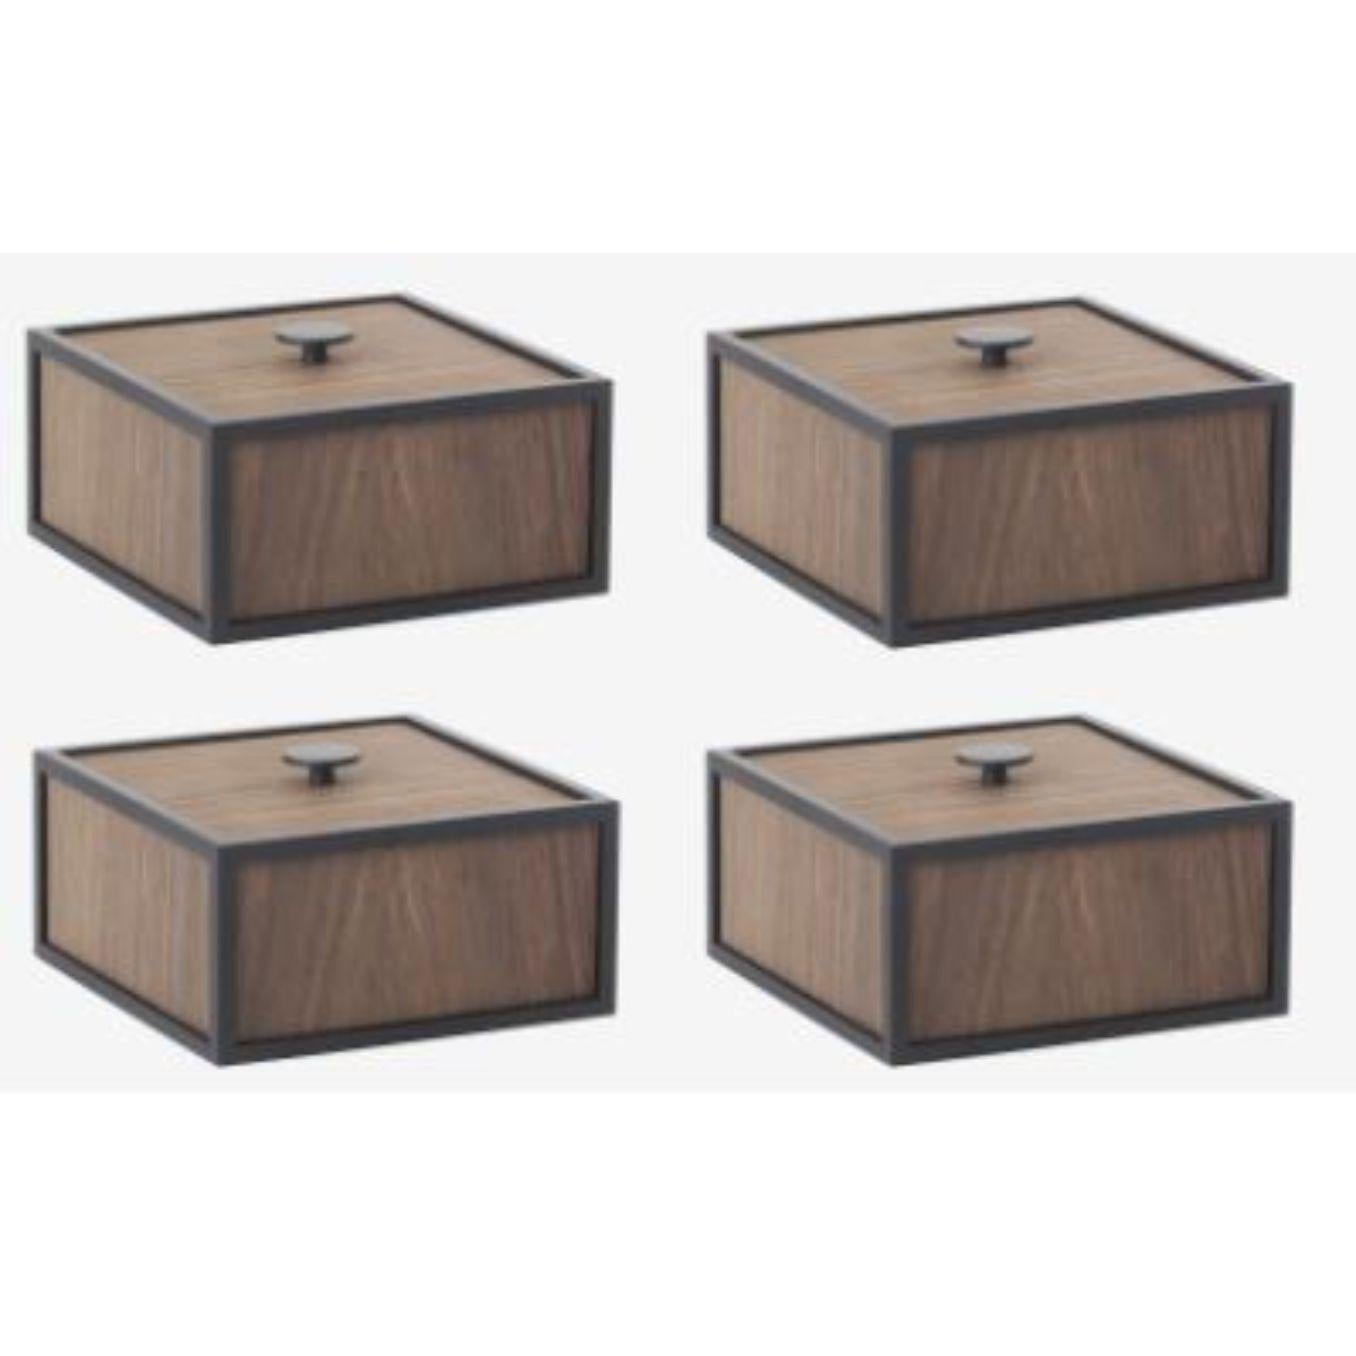 Set of 4 smoked oak frame 14 box by Lassen
Dimensions: D 10 x W 10 x H 7 cm 
Materials: Finér, Melamin, Melamine, Metal, Veneer
Weight: 1.10 Kg

Frame Box is a square box in a cubistic shape. The simple boxes are inspired by the Kubus